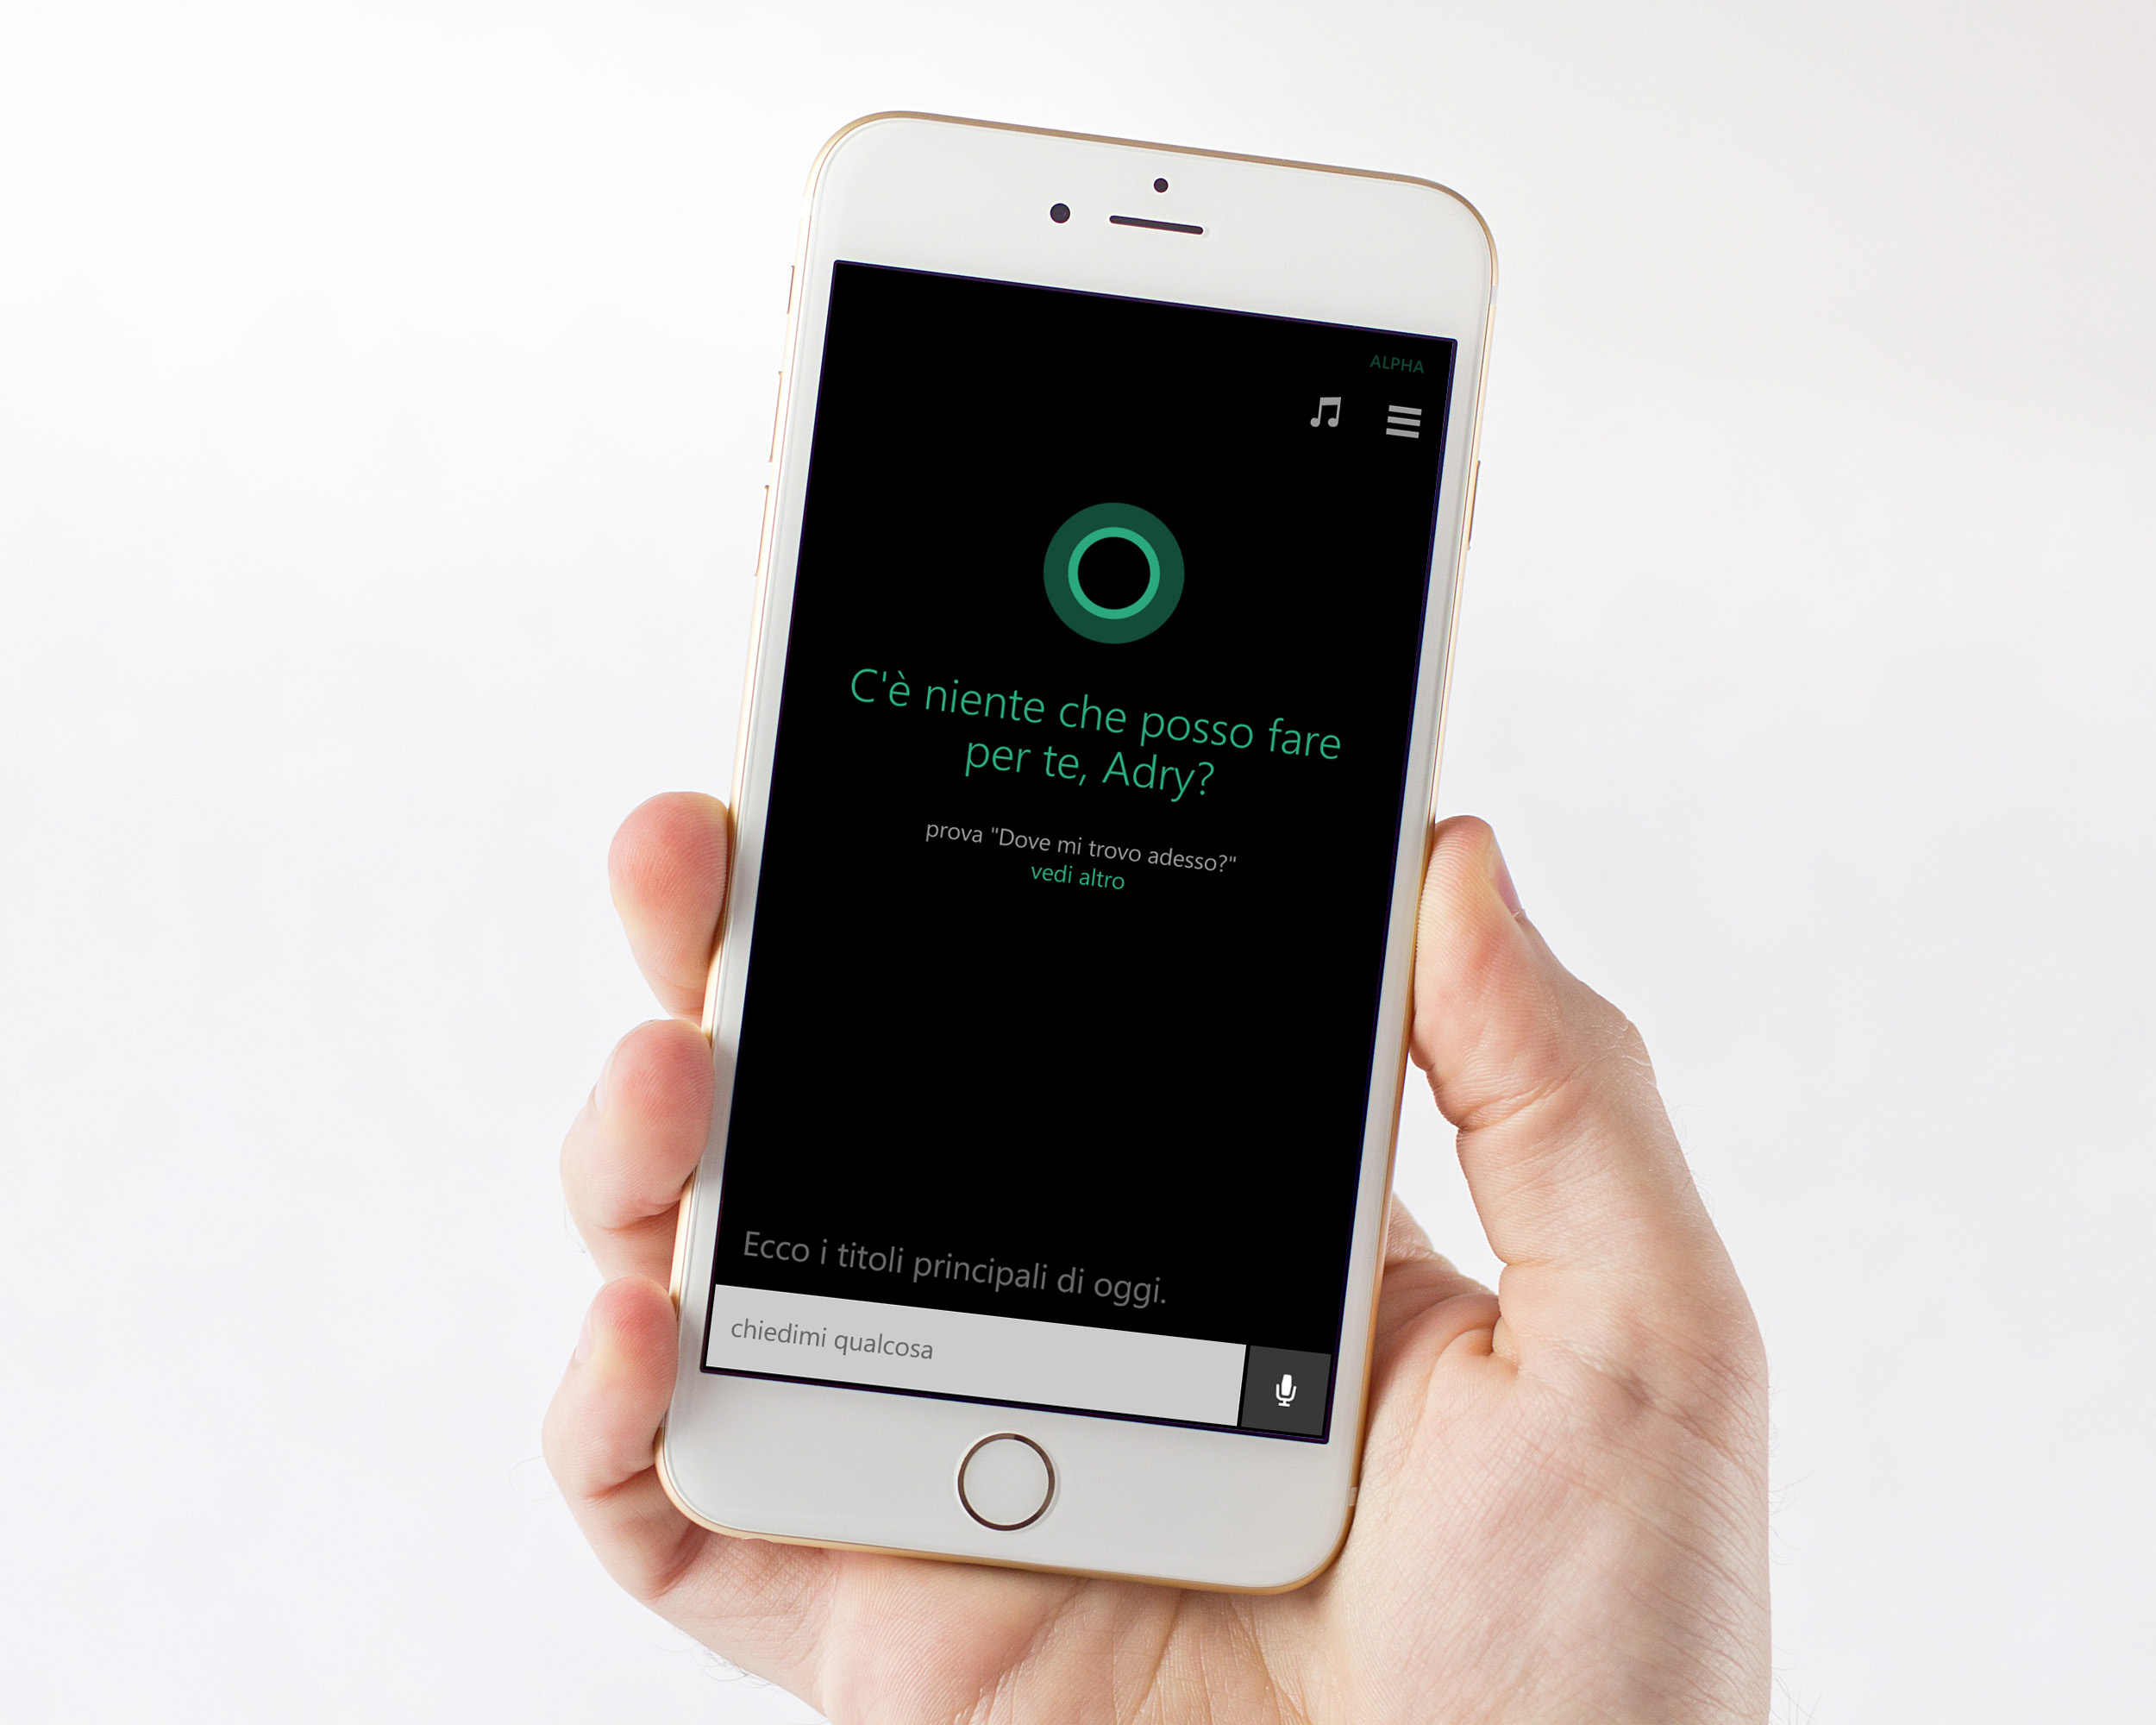 Cortana for iPhone and Android